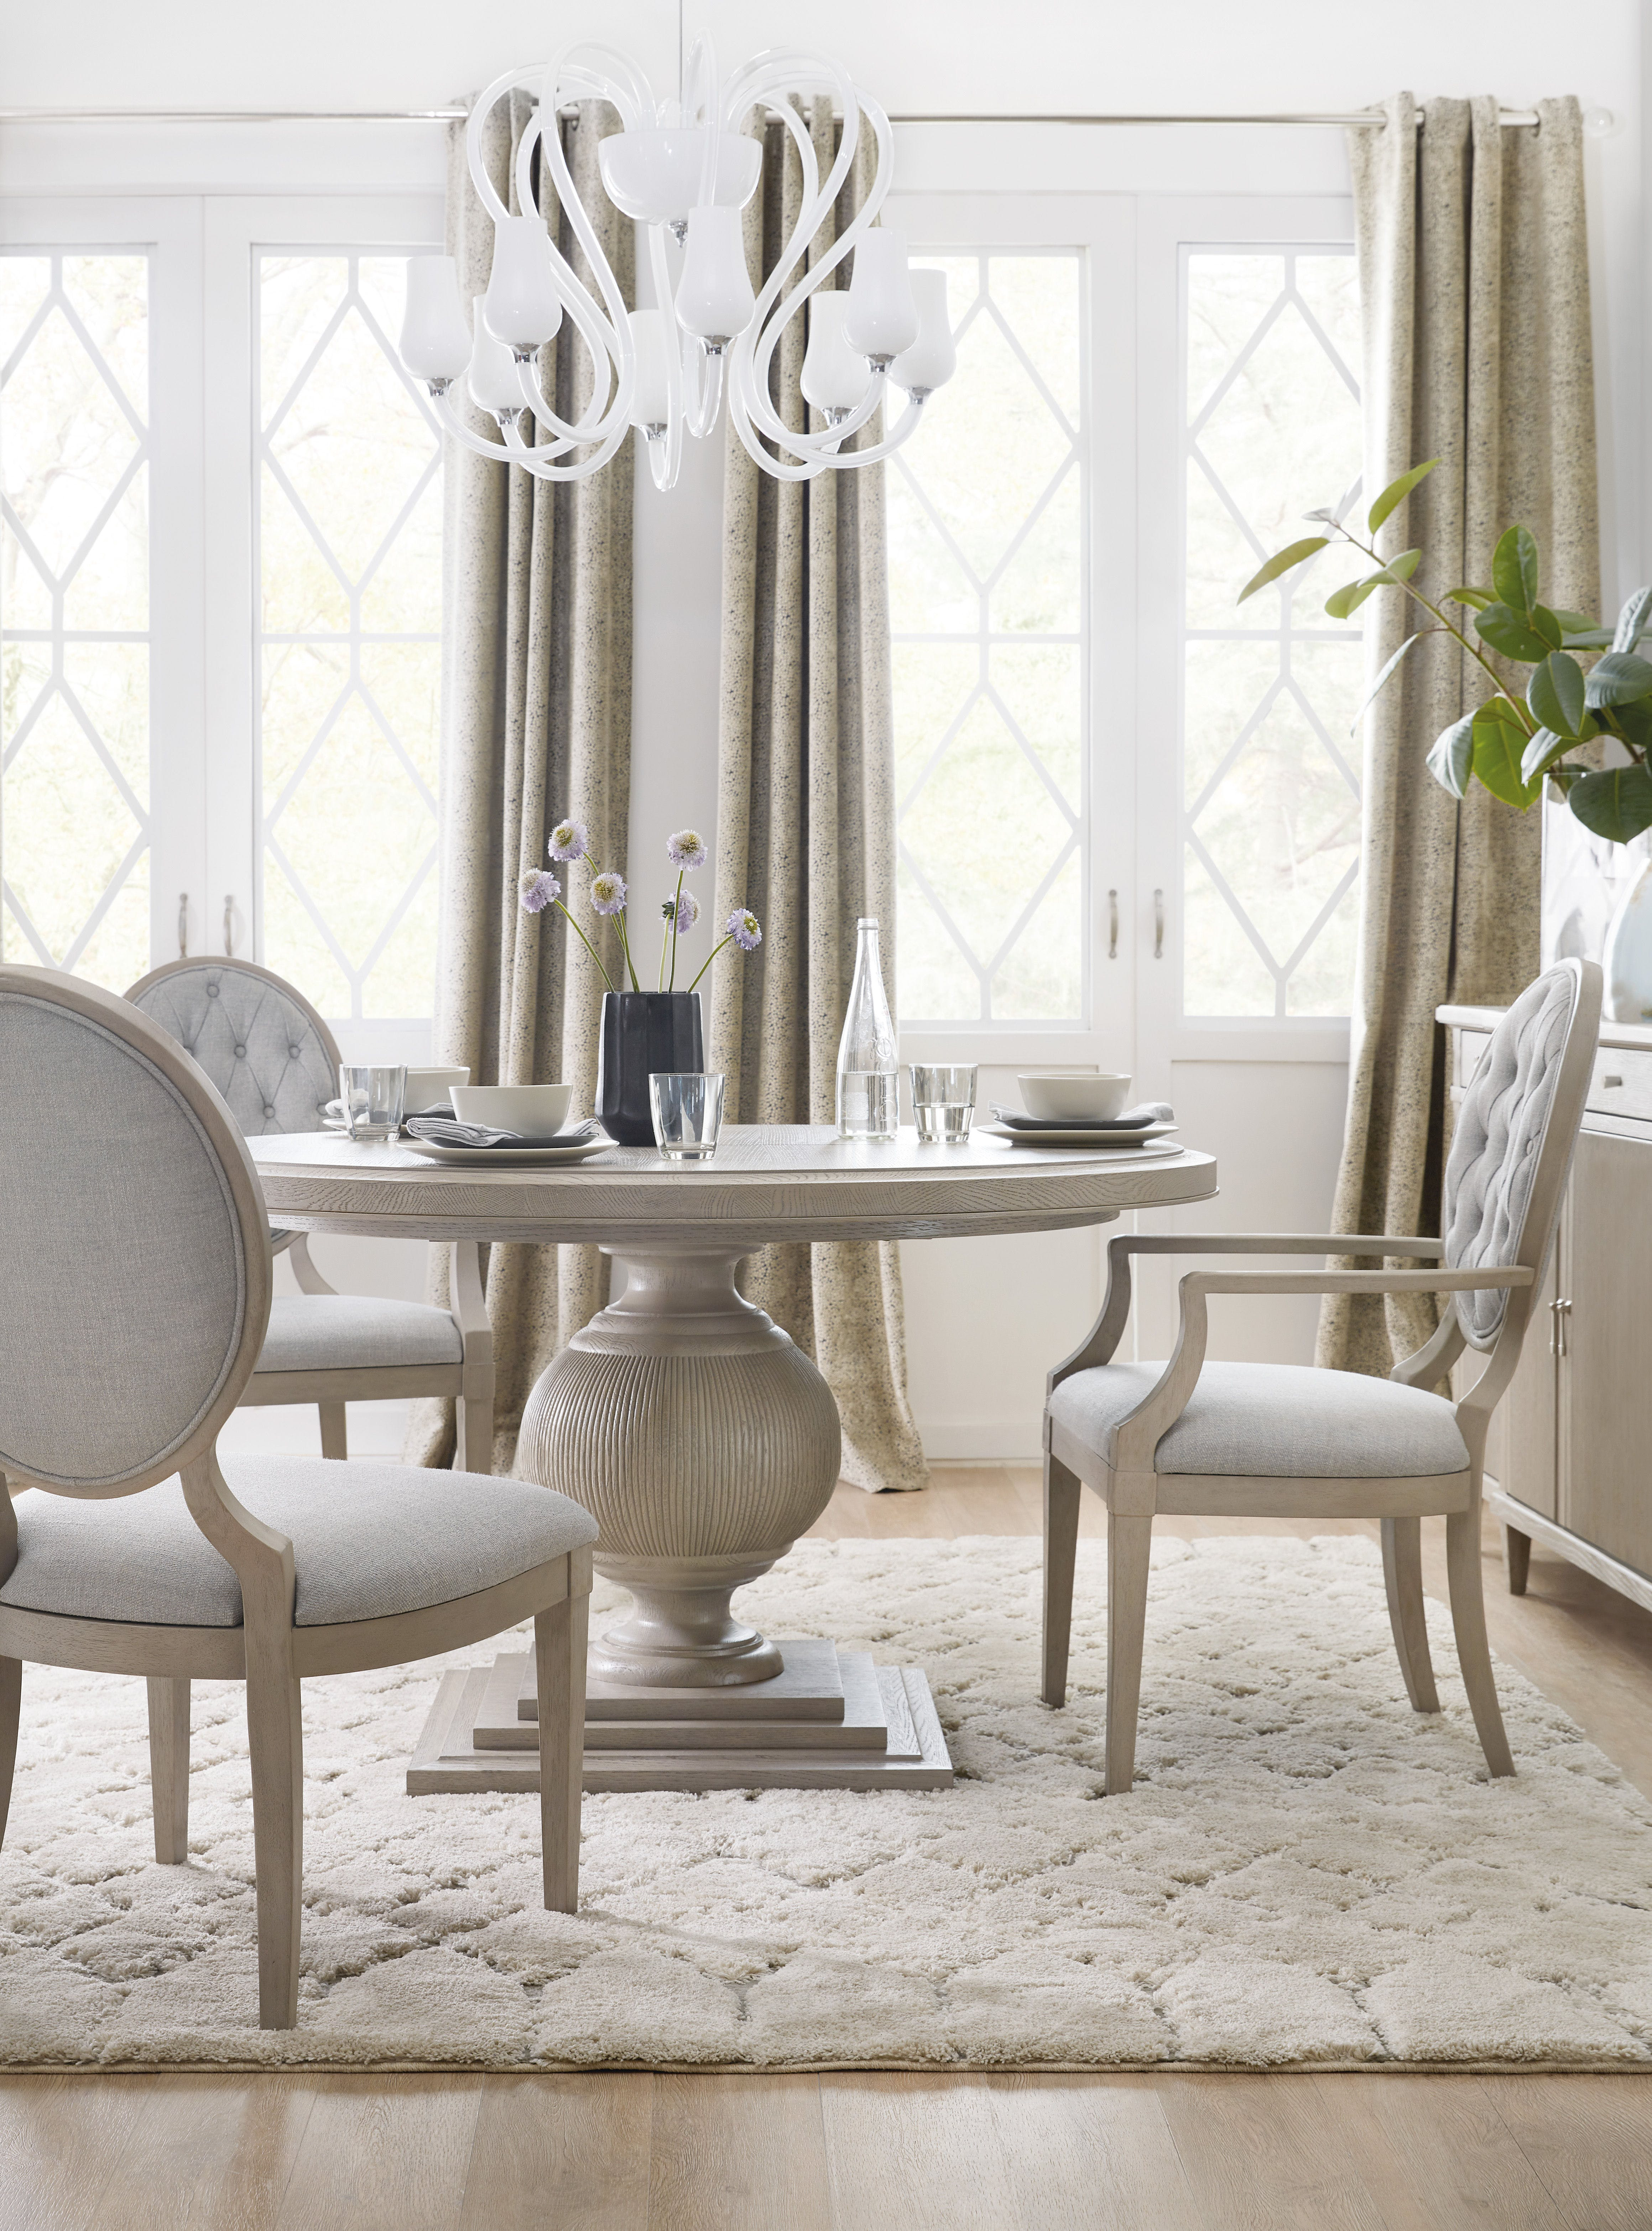 Elegant and Timeless: The Beauty of Hooker Dining Room Furniture